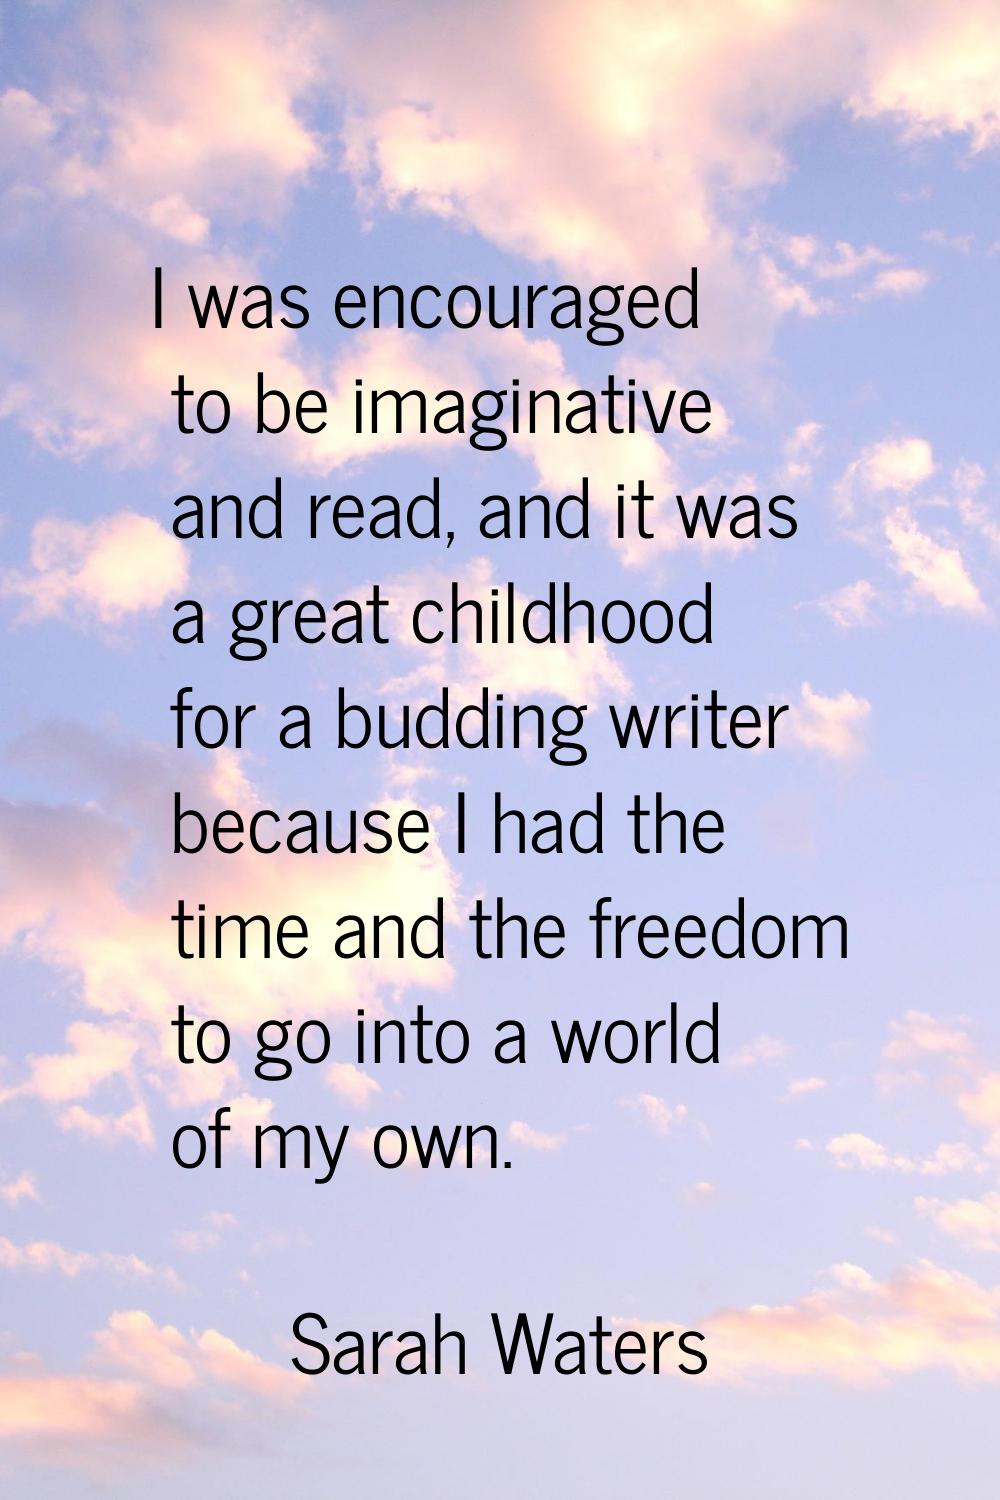 I was encouraged to be imaginative and read, and it was a great childhood for a budding writer beca